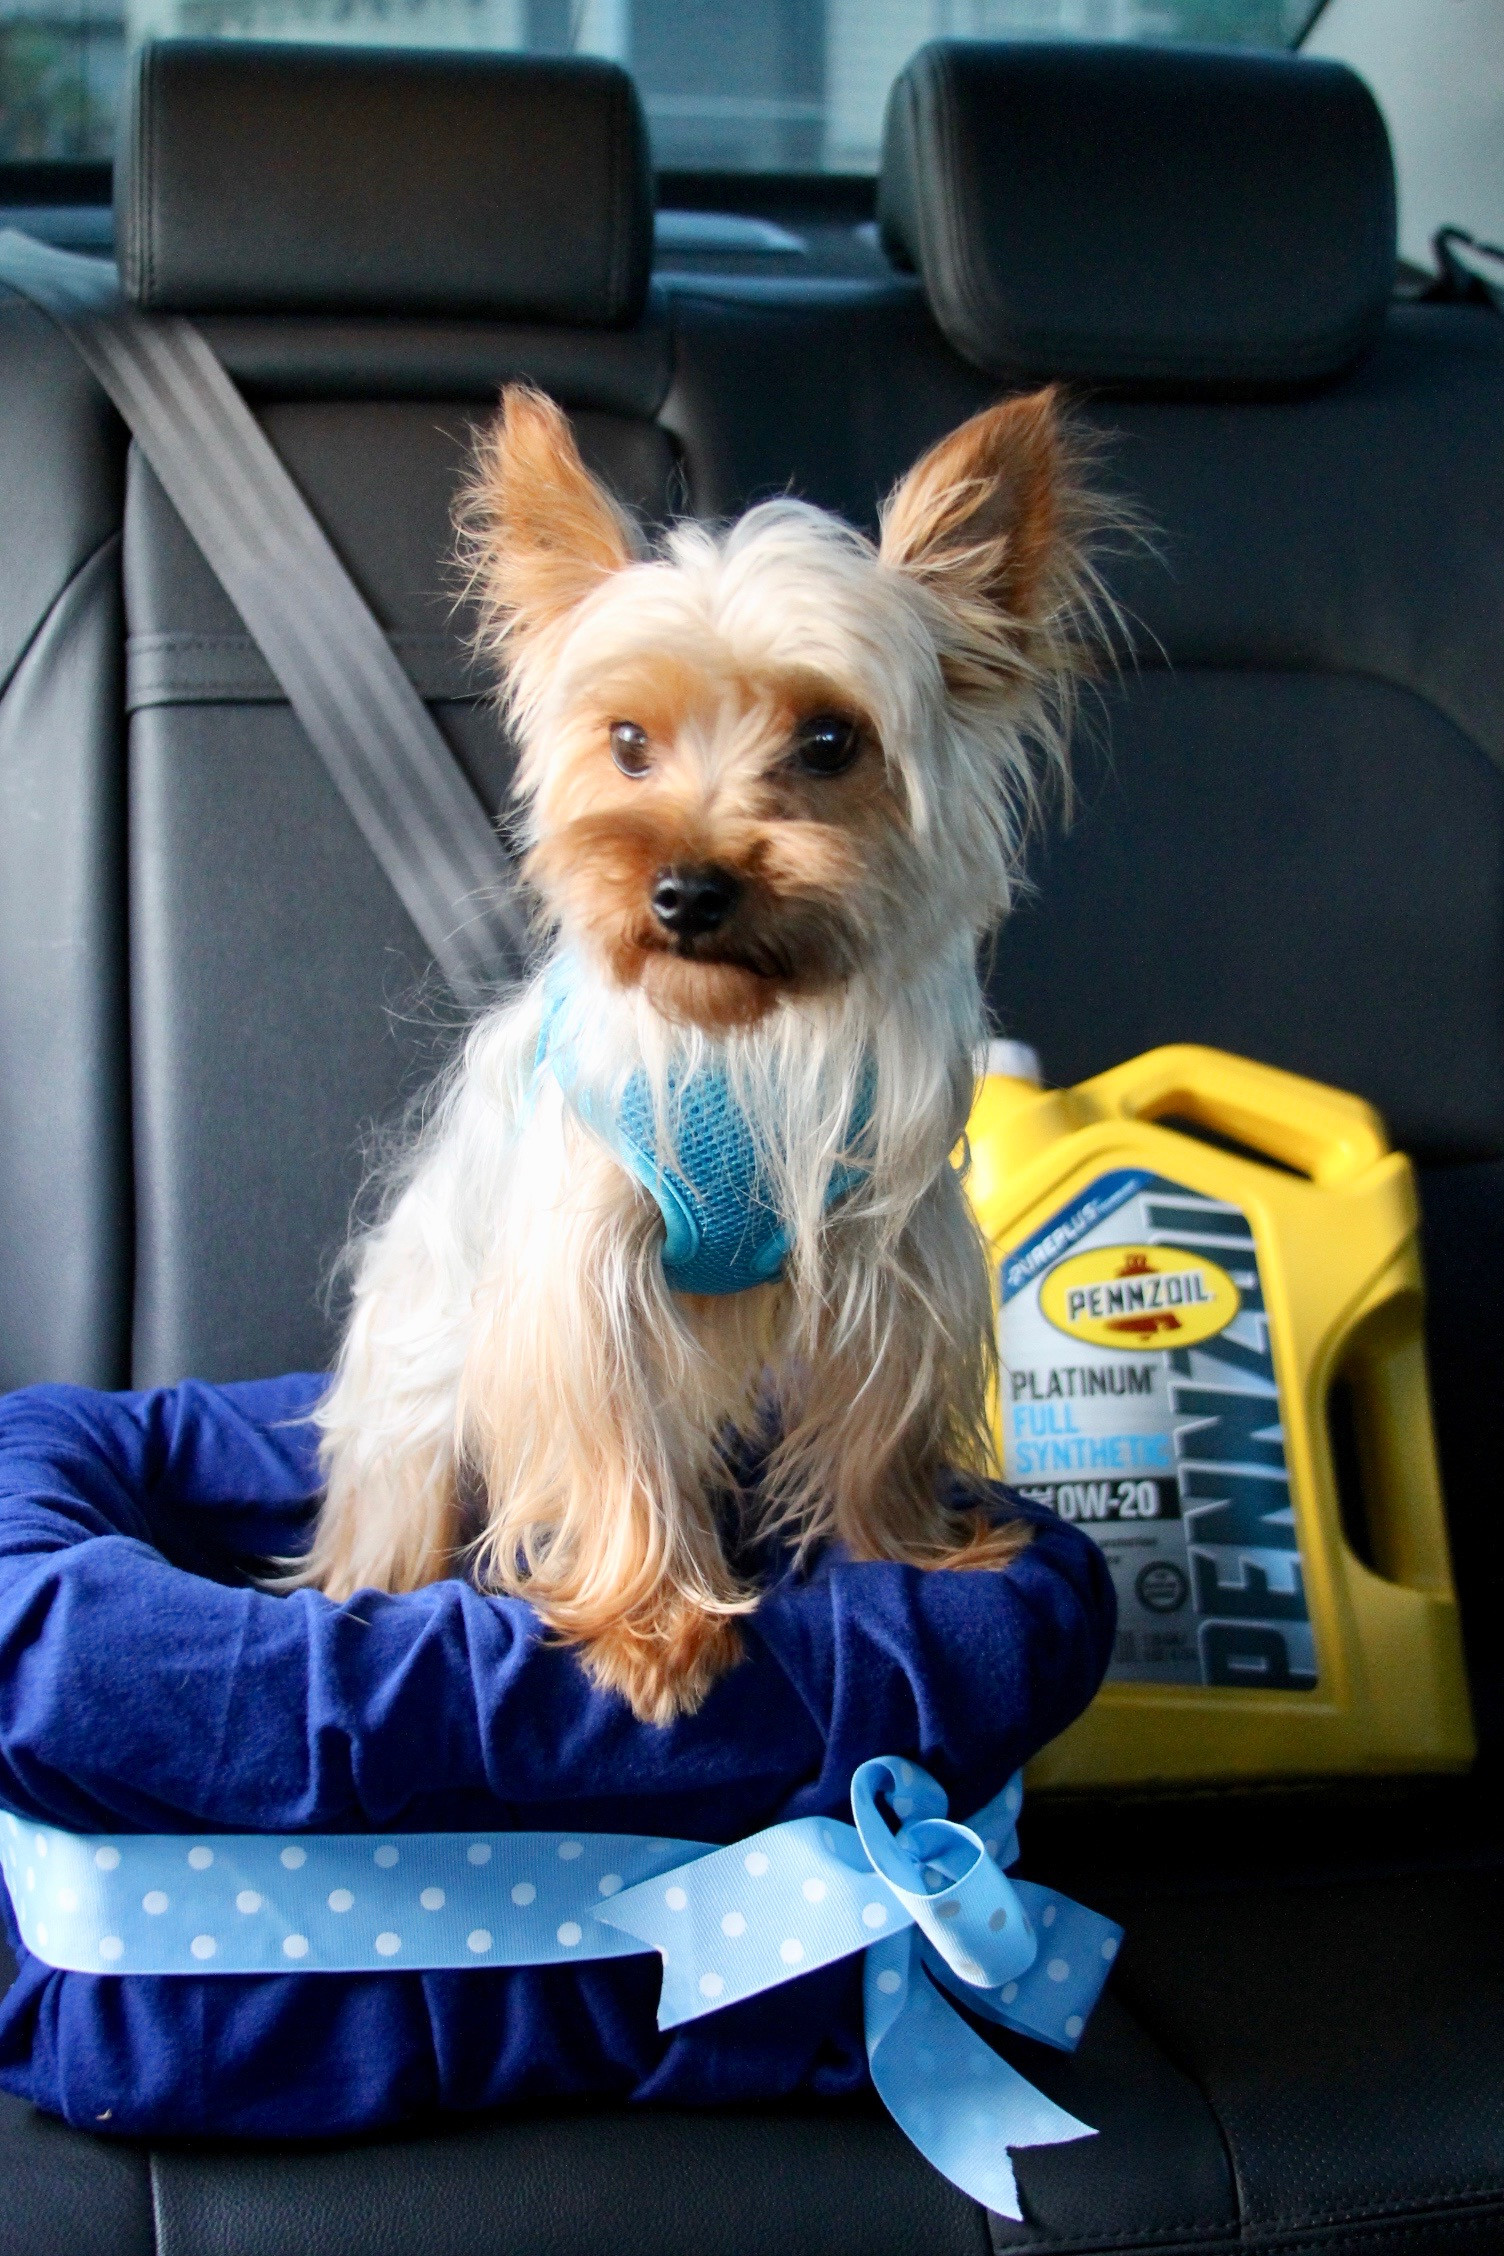 DIY Dog Booster Seat
 No Sew DIY Car Booster Seat For Your Dog Growing Up